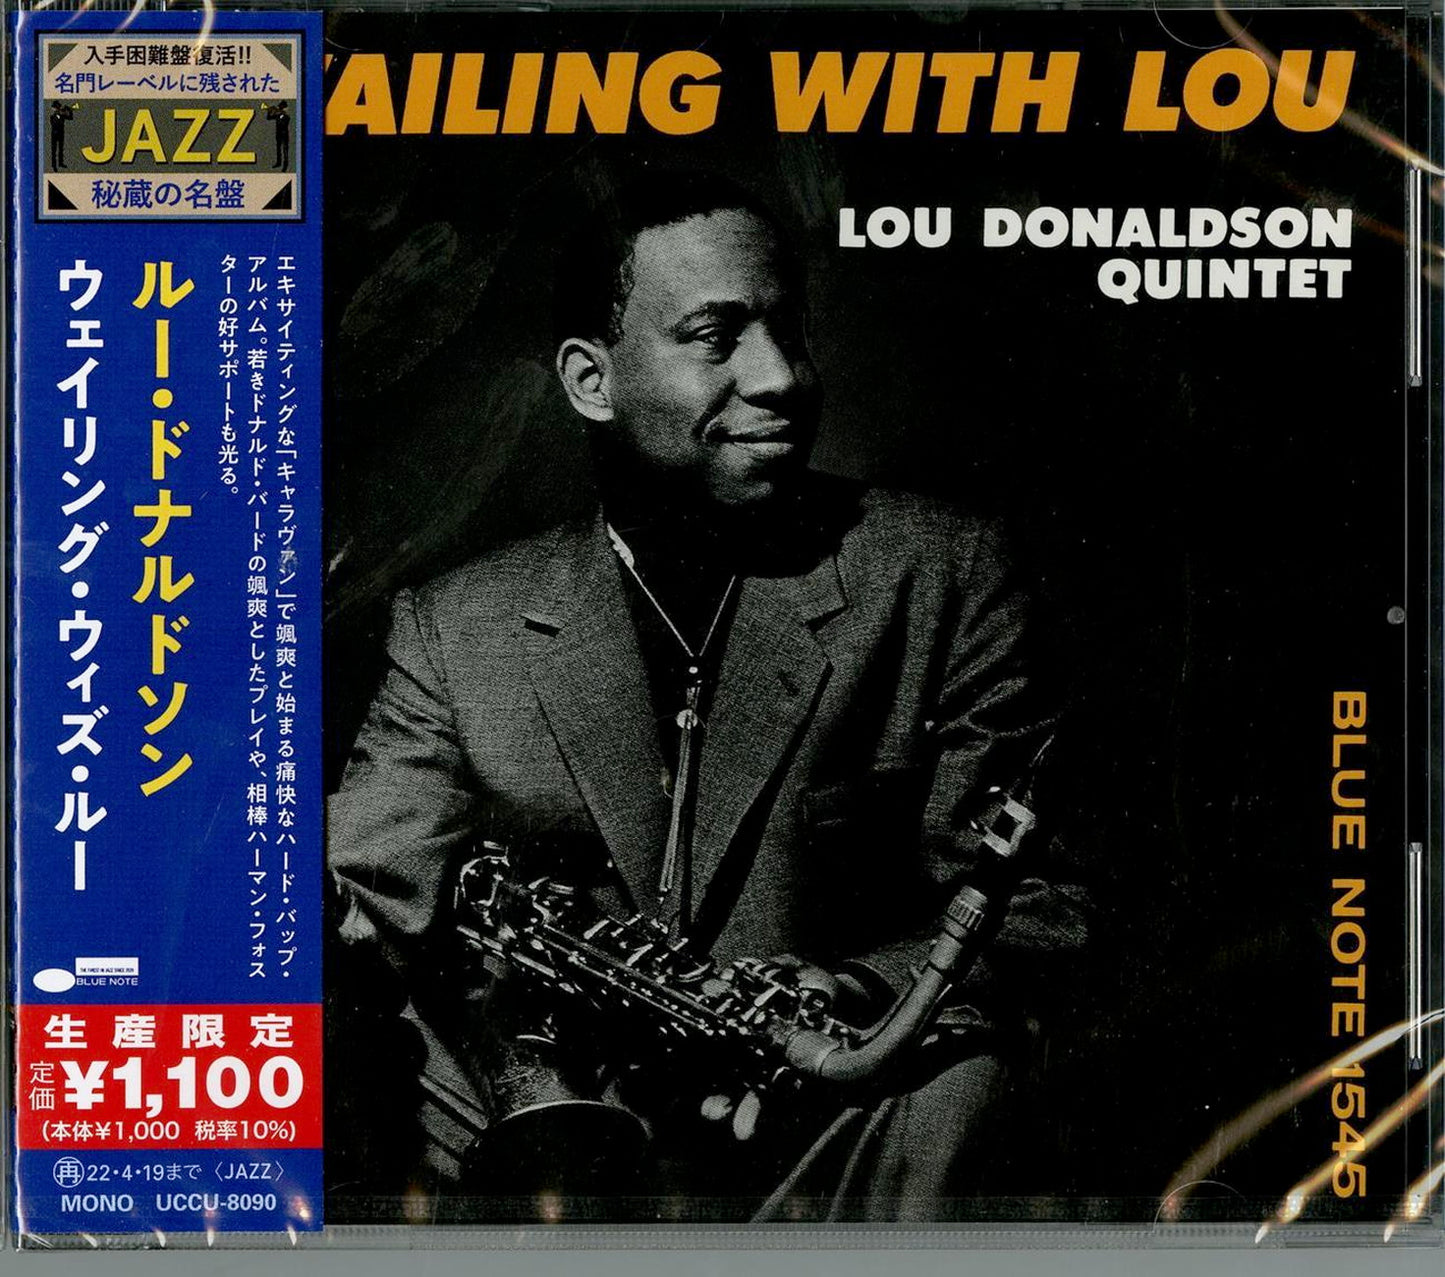 Lou Donaldson - Wailing With Lou - Japan  CD Limited Edition